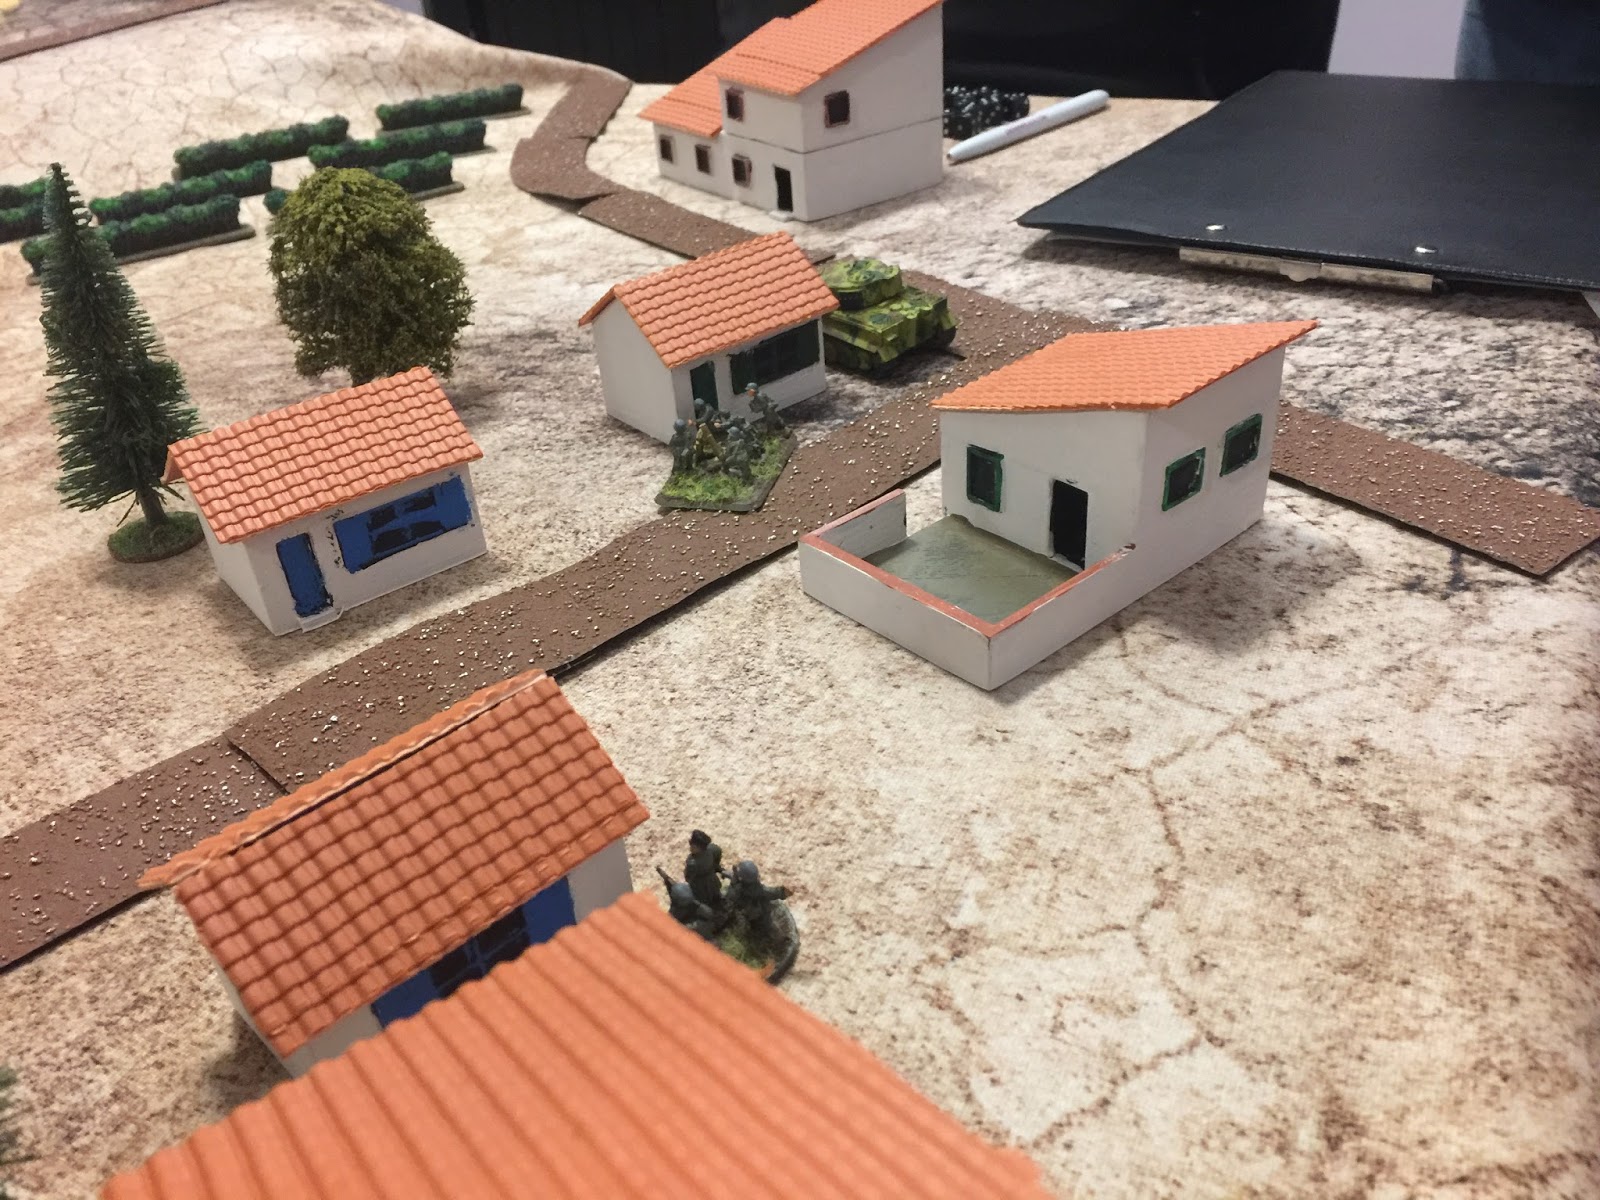  The 'Tiger' lurking behind a house. (The roof material is Wills 00 pantile sheet). Also visible one of the German MG teams and the overall German CO. And some Battlefront vineyards, with a heavy ink wash to hide the hideously bright green! 